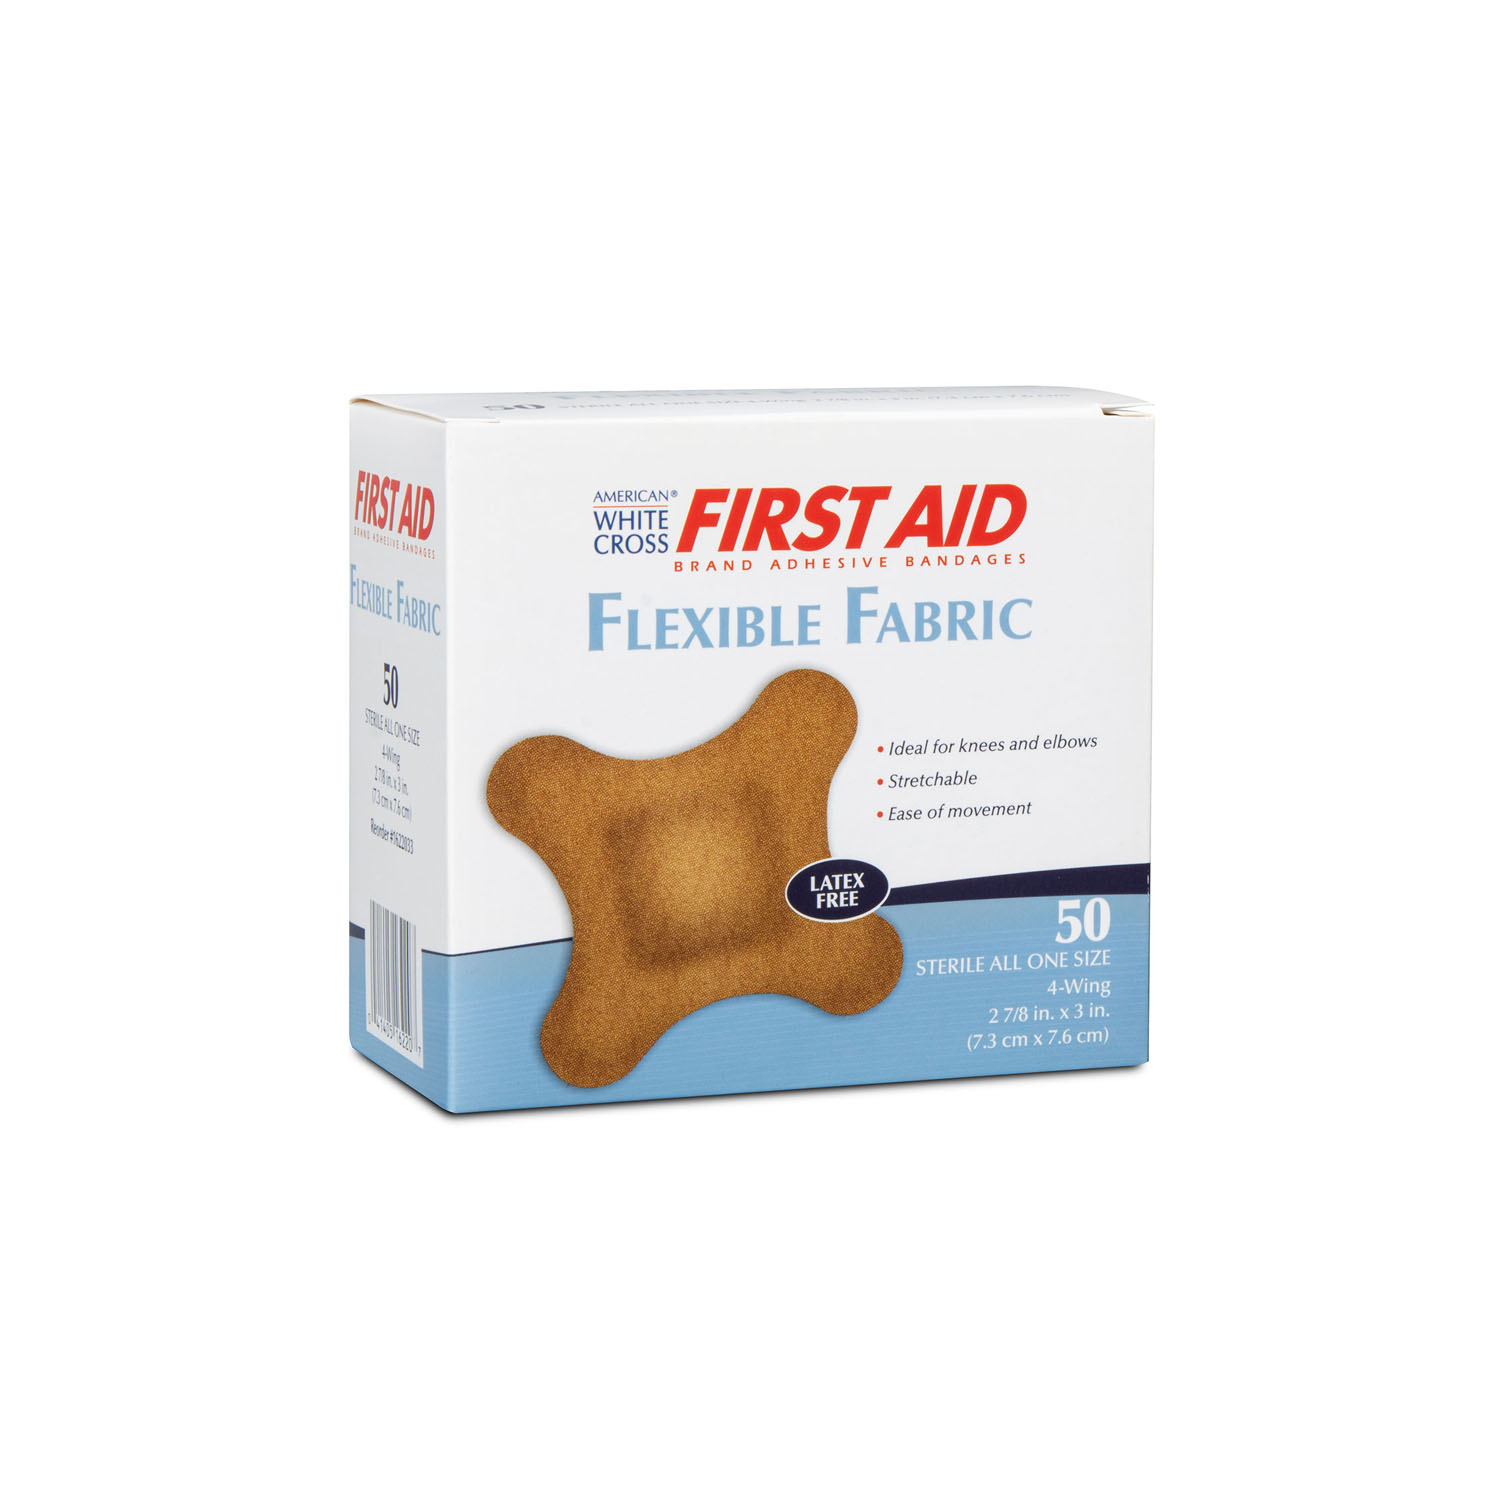 DUKAL FIRST AID FLEXIBLE ADHESIVE BANDAGES : 1622033 CS $143.59 Stocked